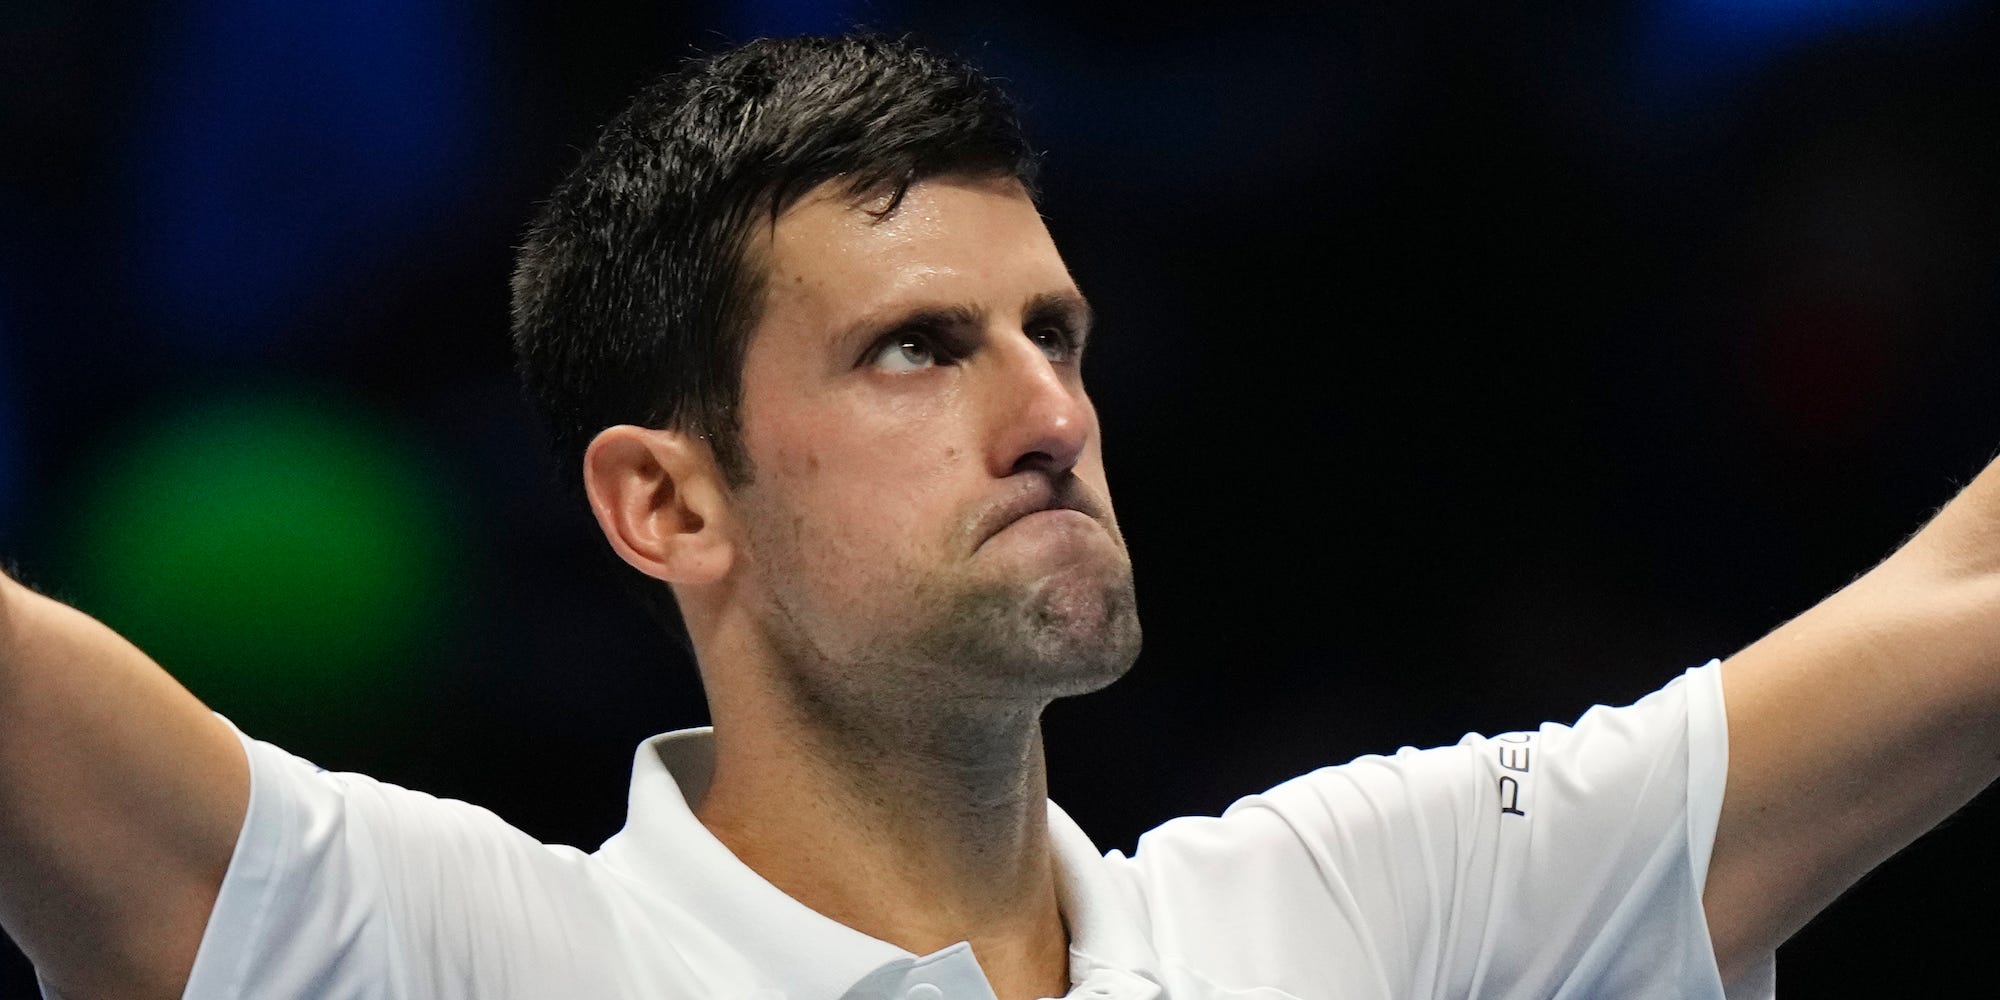 Novak Djokovic raises his arms and looks at the crowd after a match in 2021.